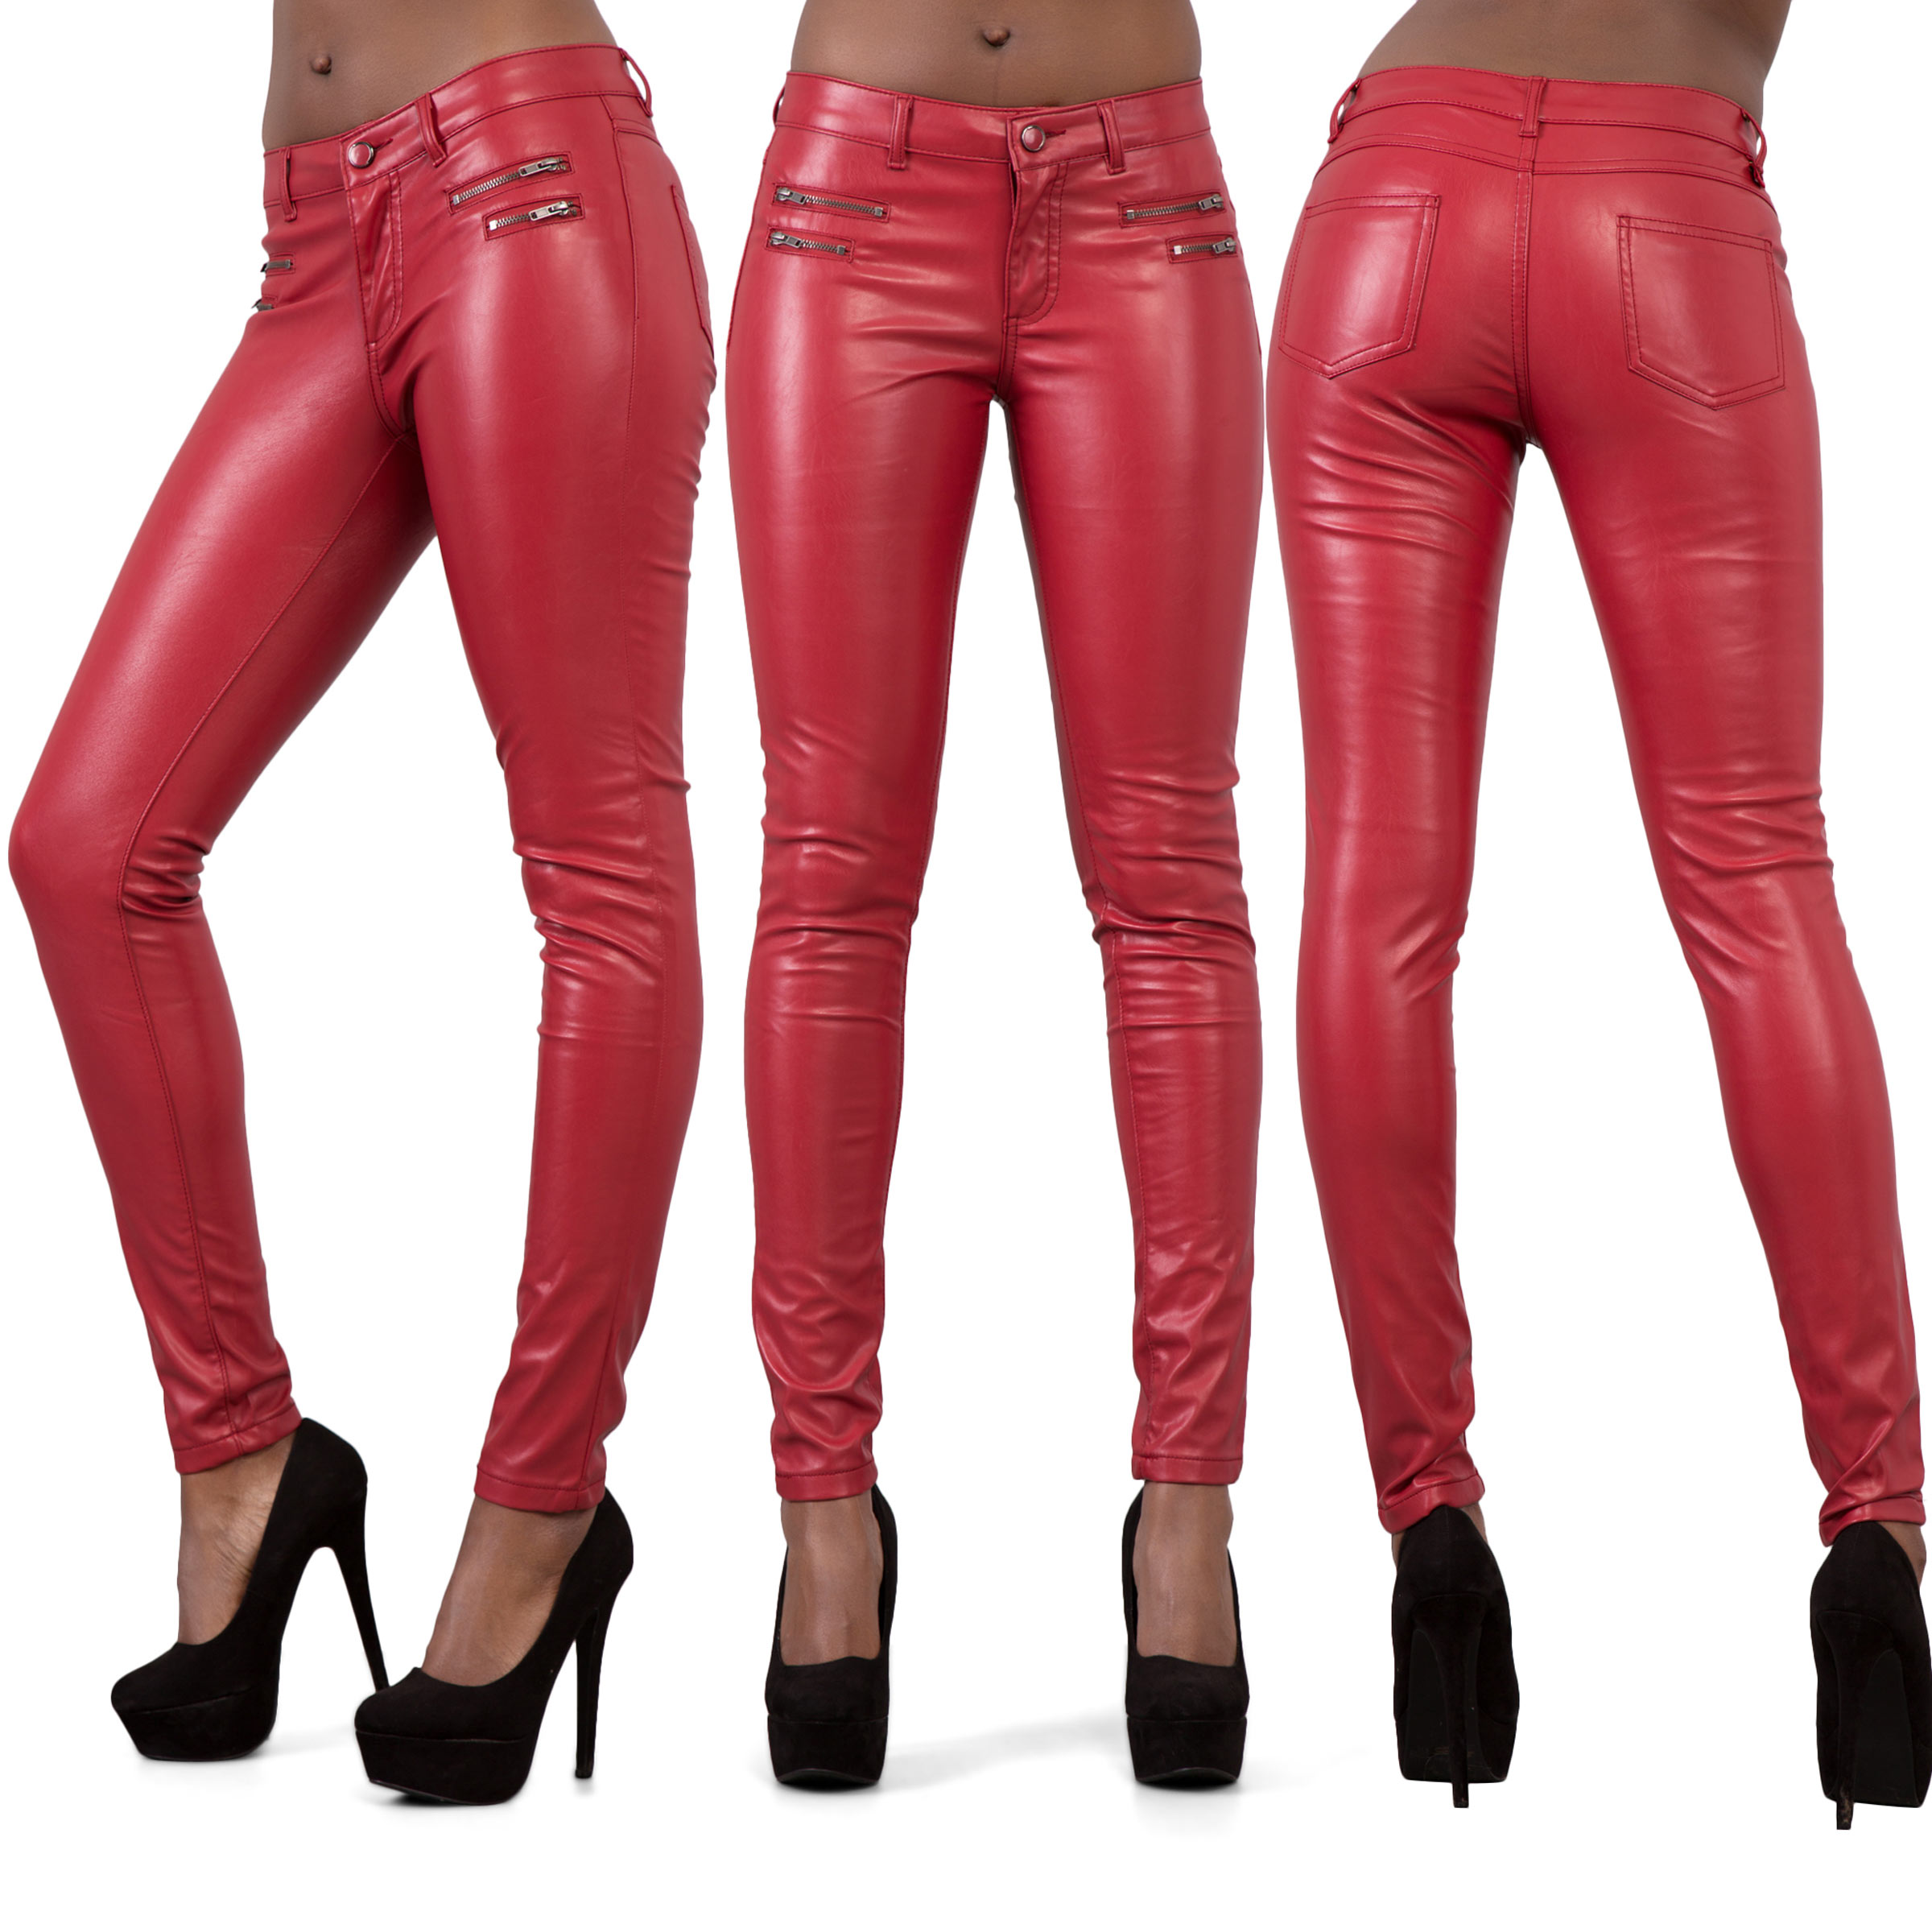 red wet look jeans